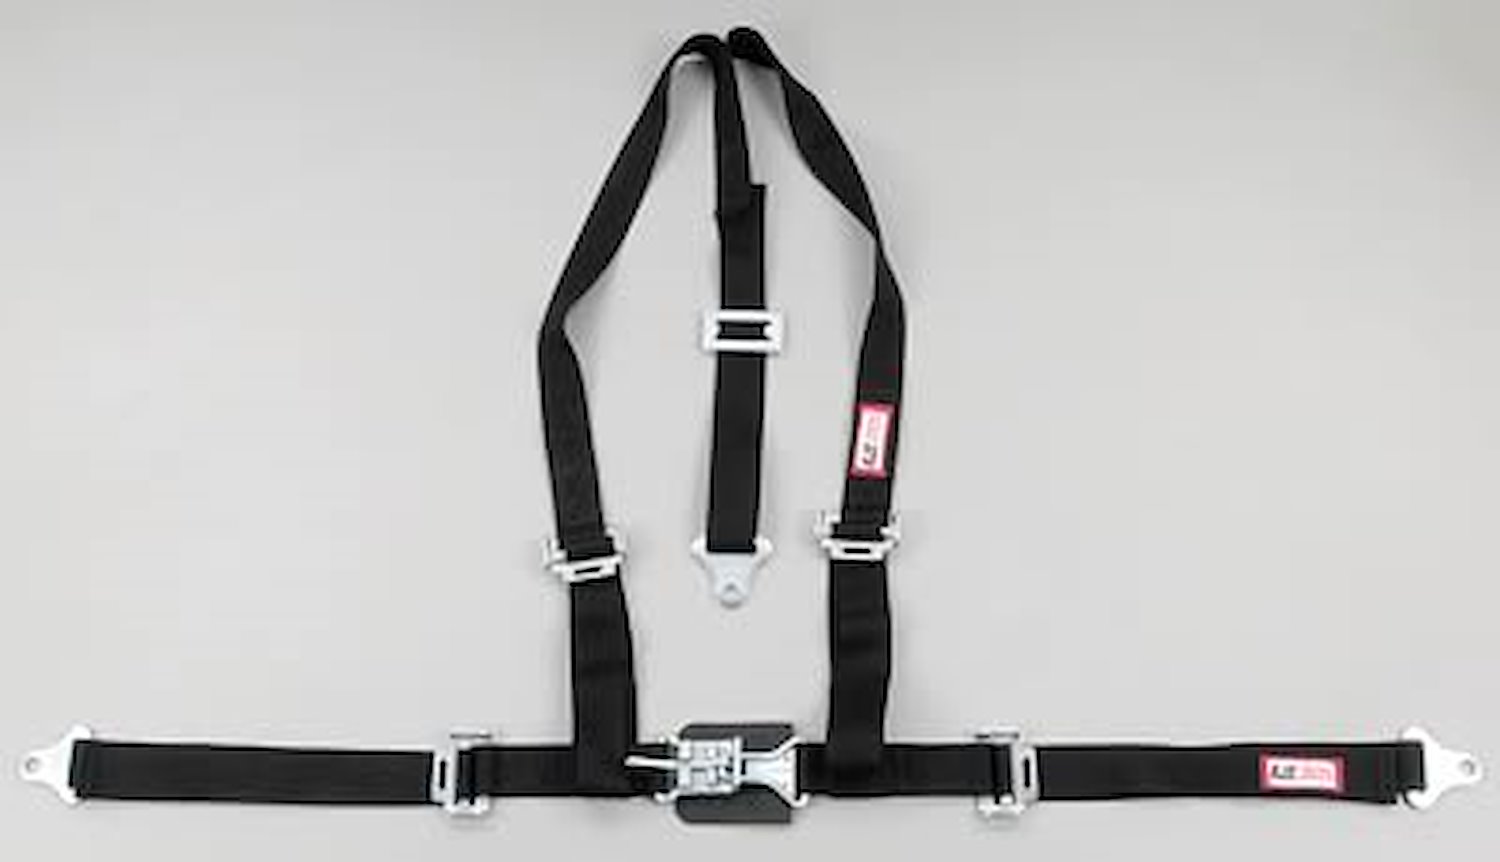 NON-SFI L&L HARNESS 2 PULL UP Lap Belt SEWN IN 2 S.H. Individual ROLL BAR Mount w/STERNUM STRAP ALL WRAP ENDS RED